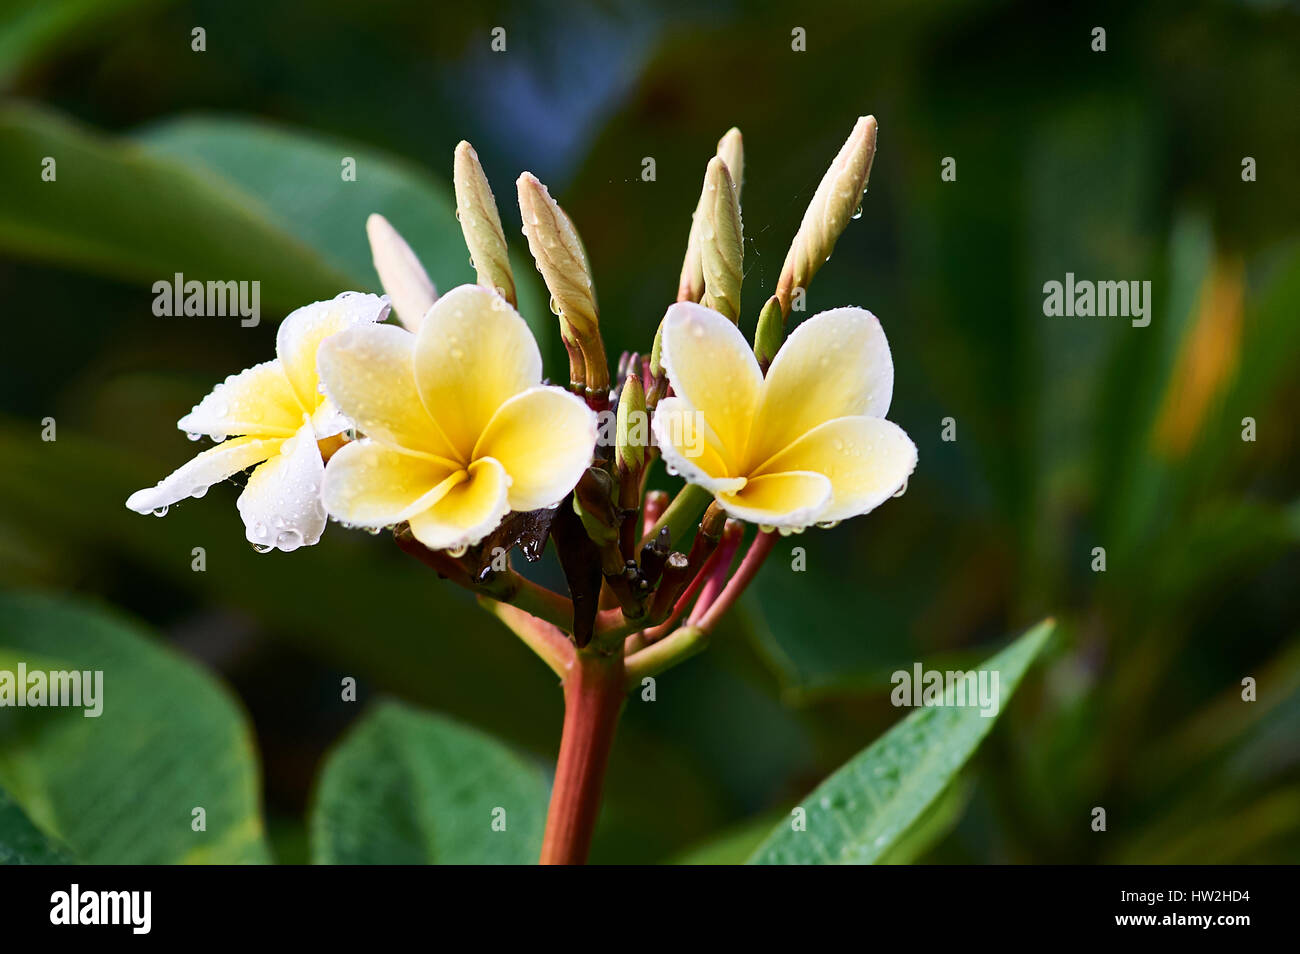 Yellow blossoms of a Frangipani tree (also called Temple Tree or Pagoda Tree) Stock Photo